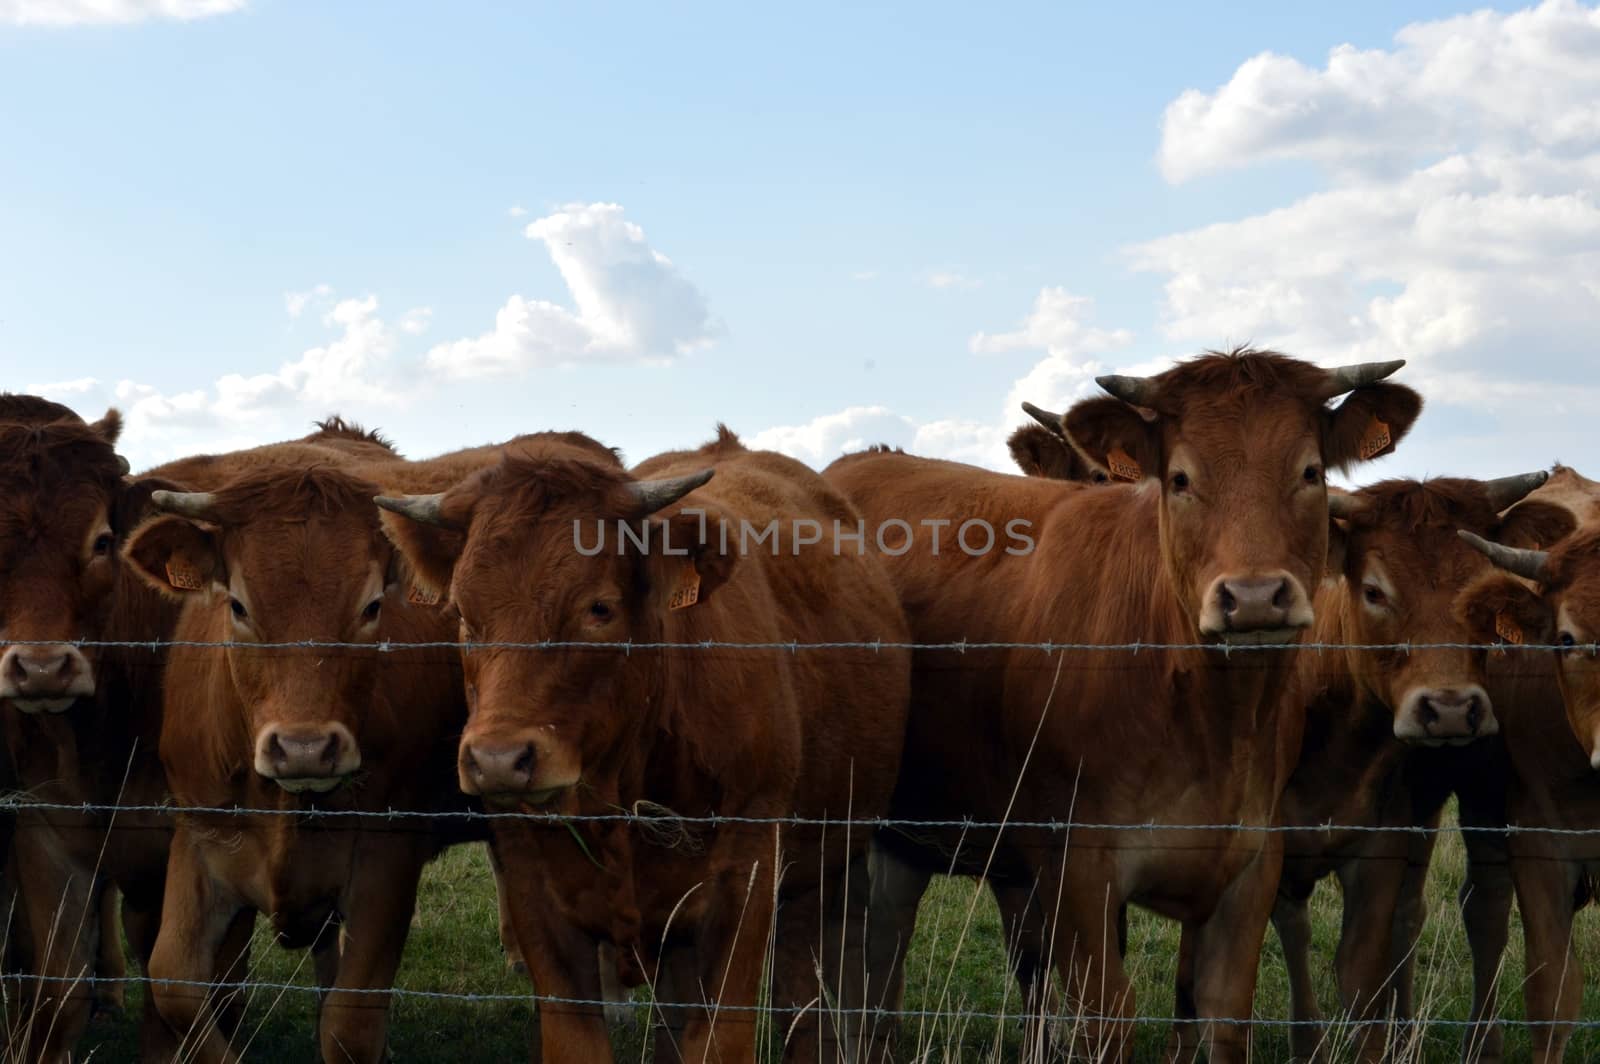 Several cows of brown color which looks at me with interest.